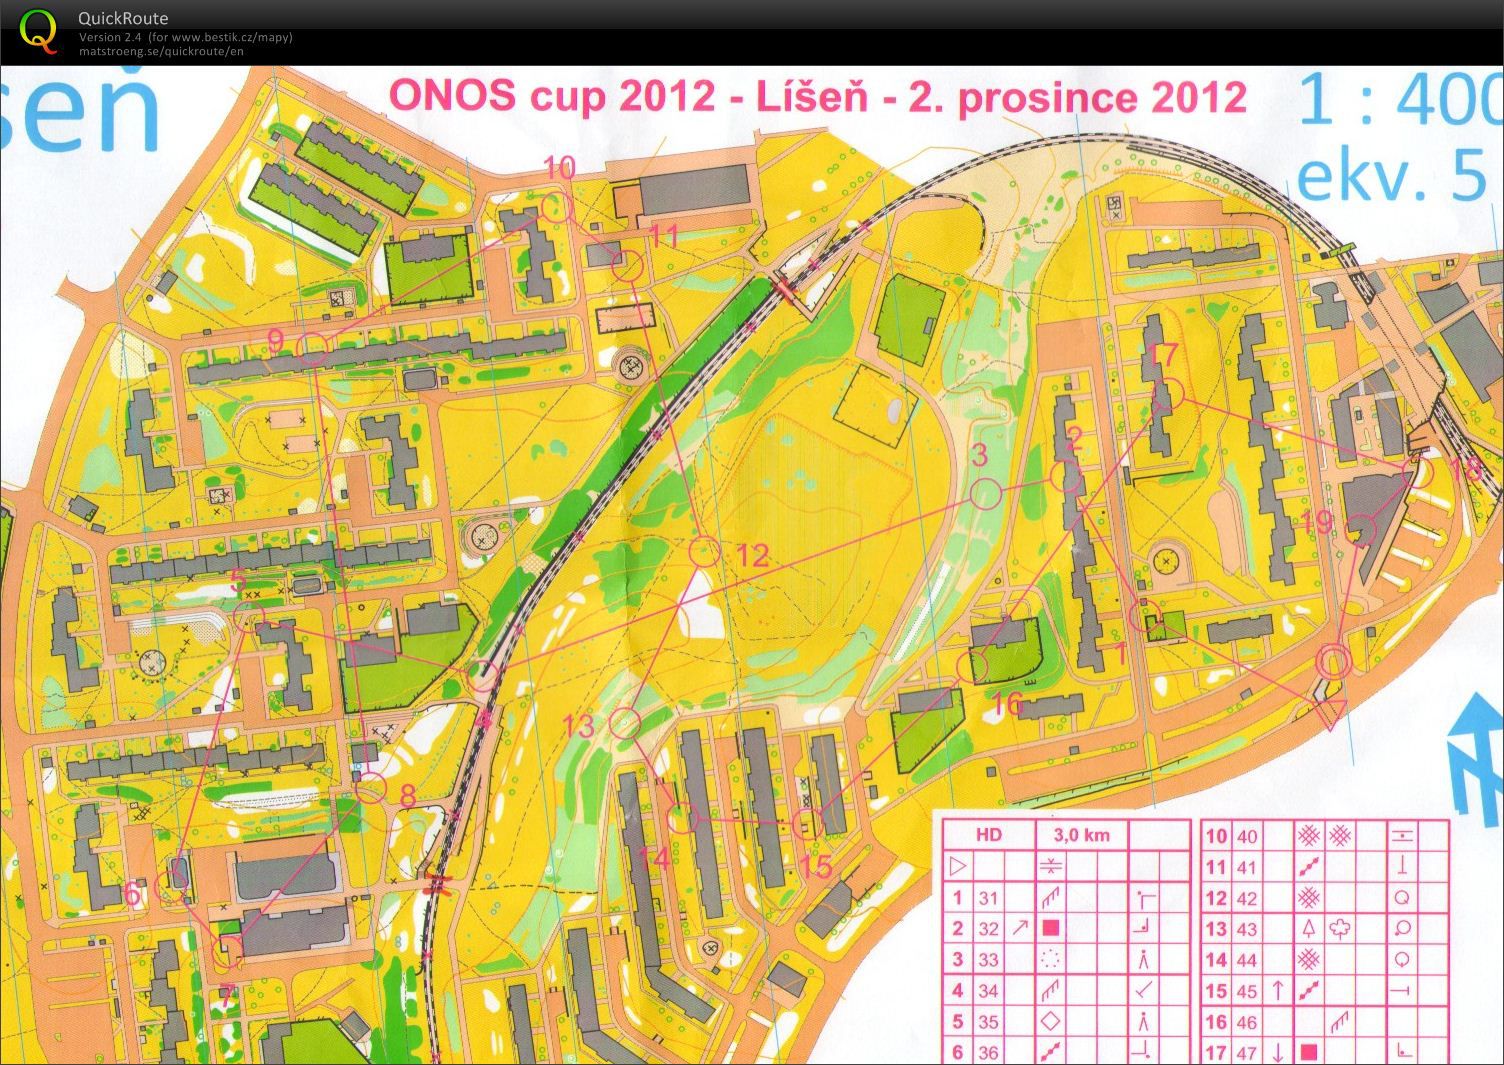 Onos cup (02.12.2012)